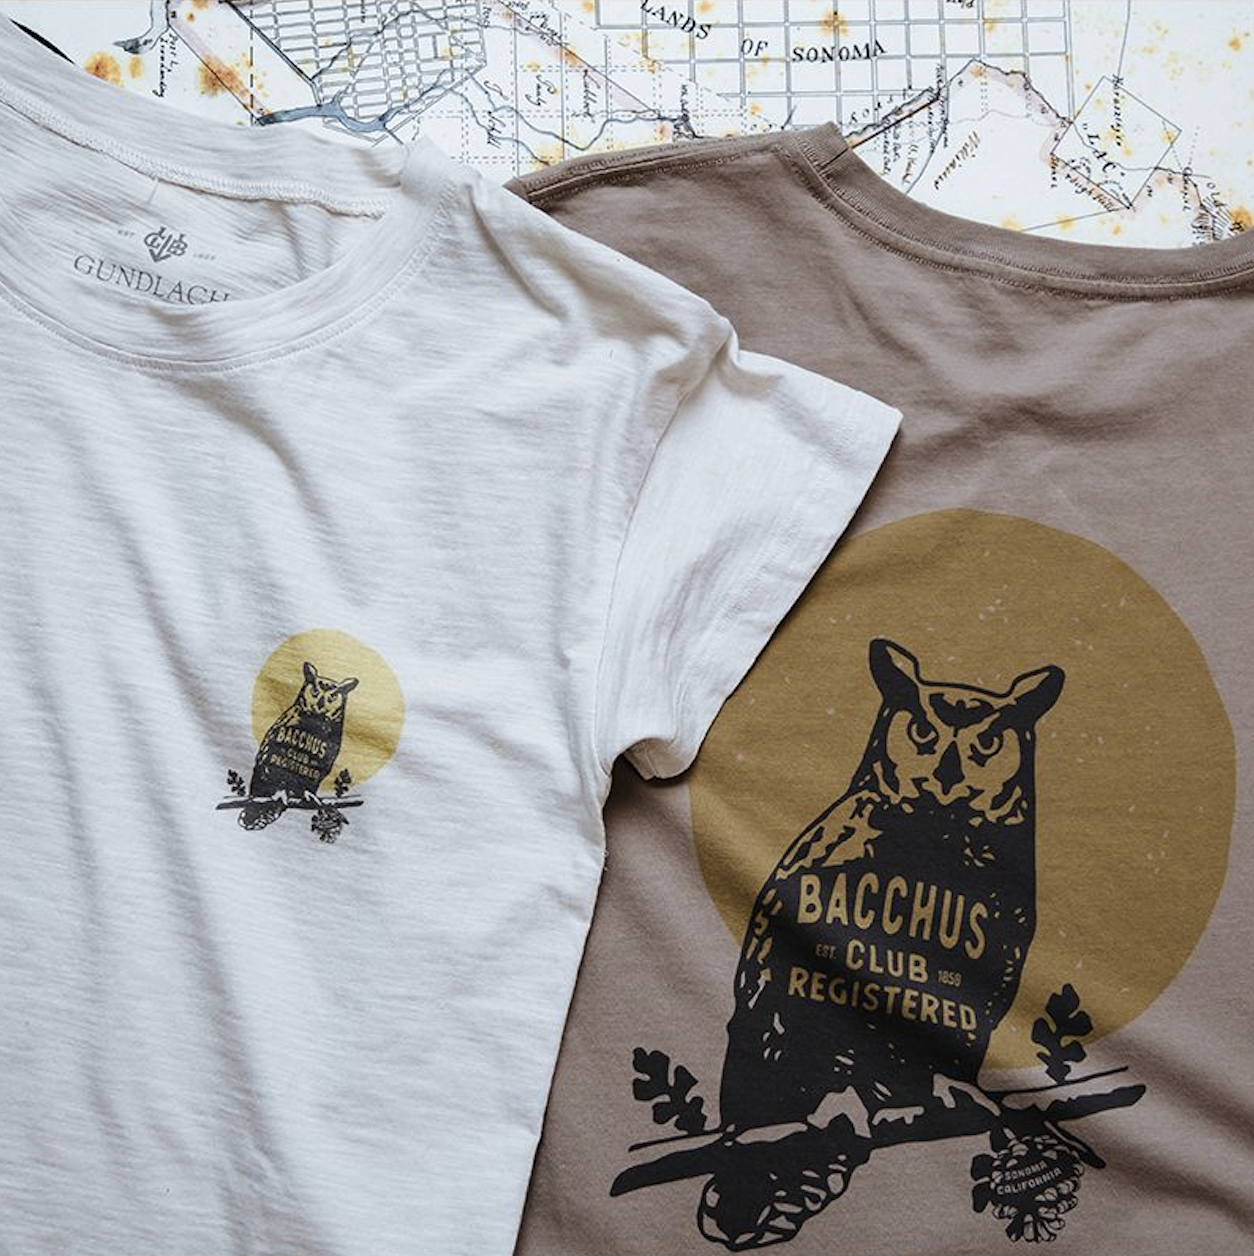 White shirt with an owl printed on the chest and brown shirt with an owl printed on the back